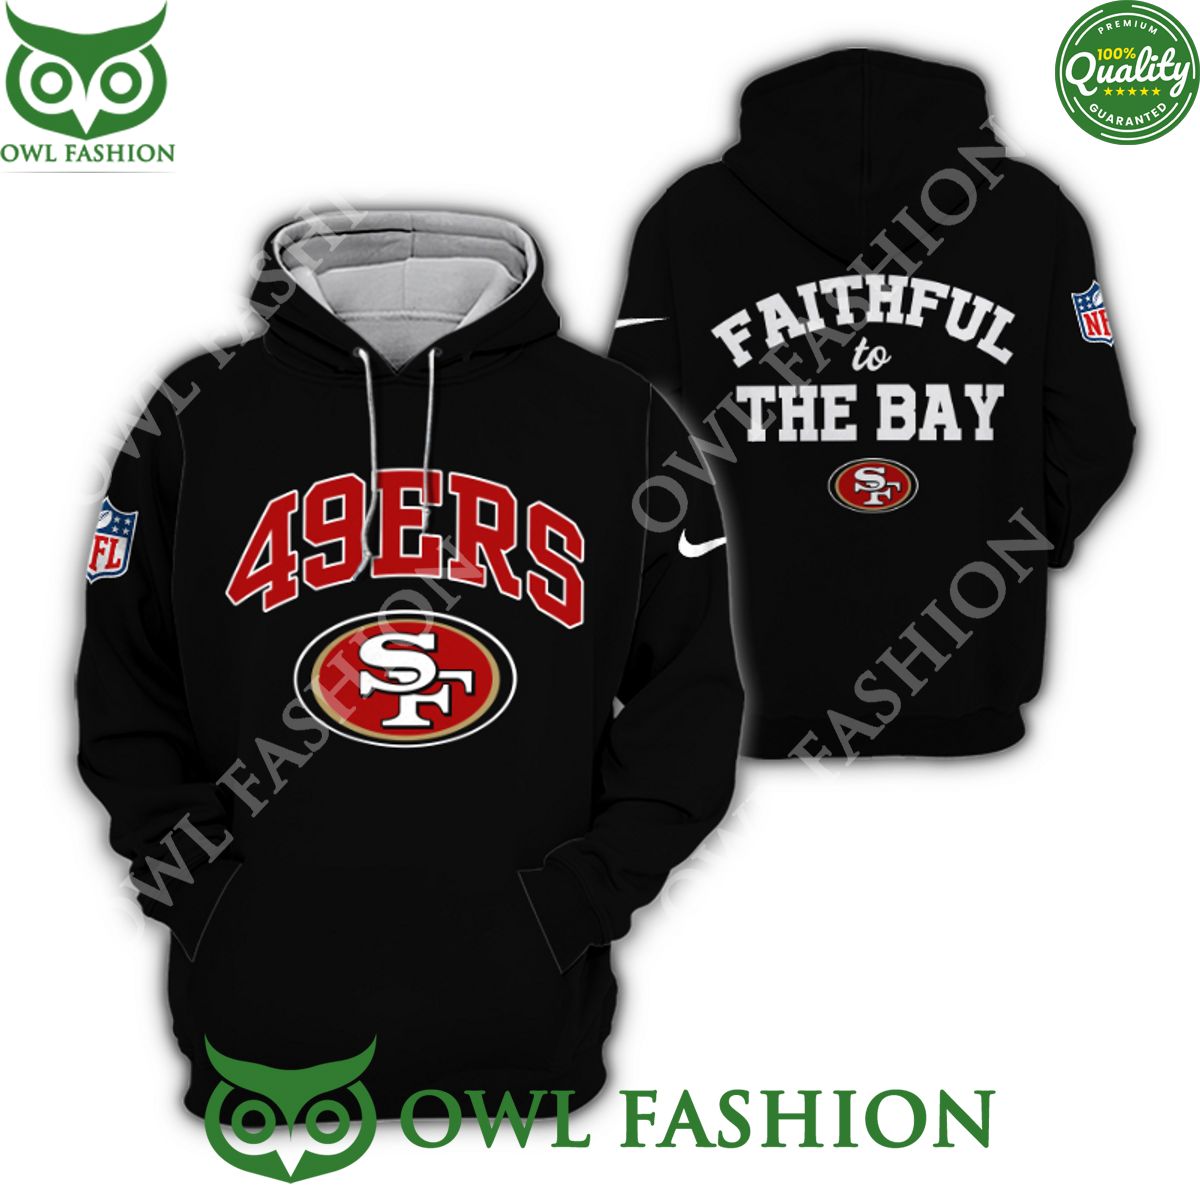 San Francisco 49ers Faithful to The Bay Printed Hoodie 3D